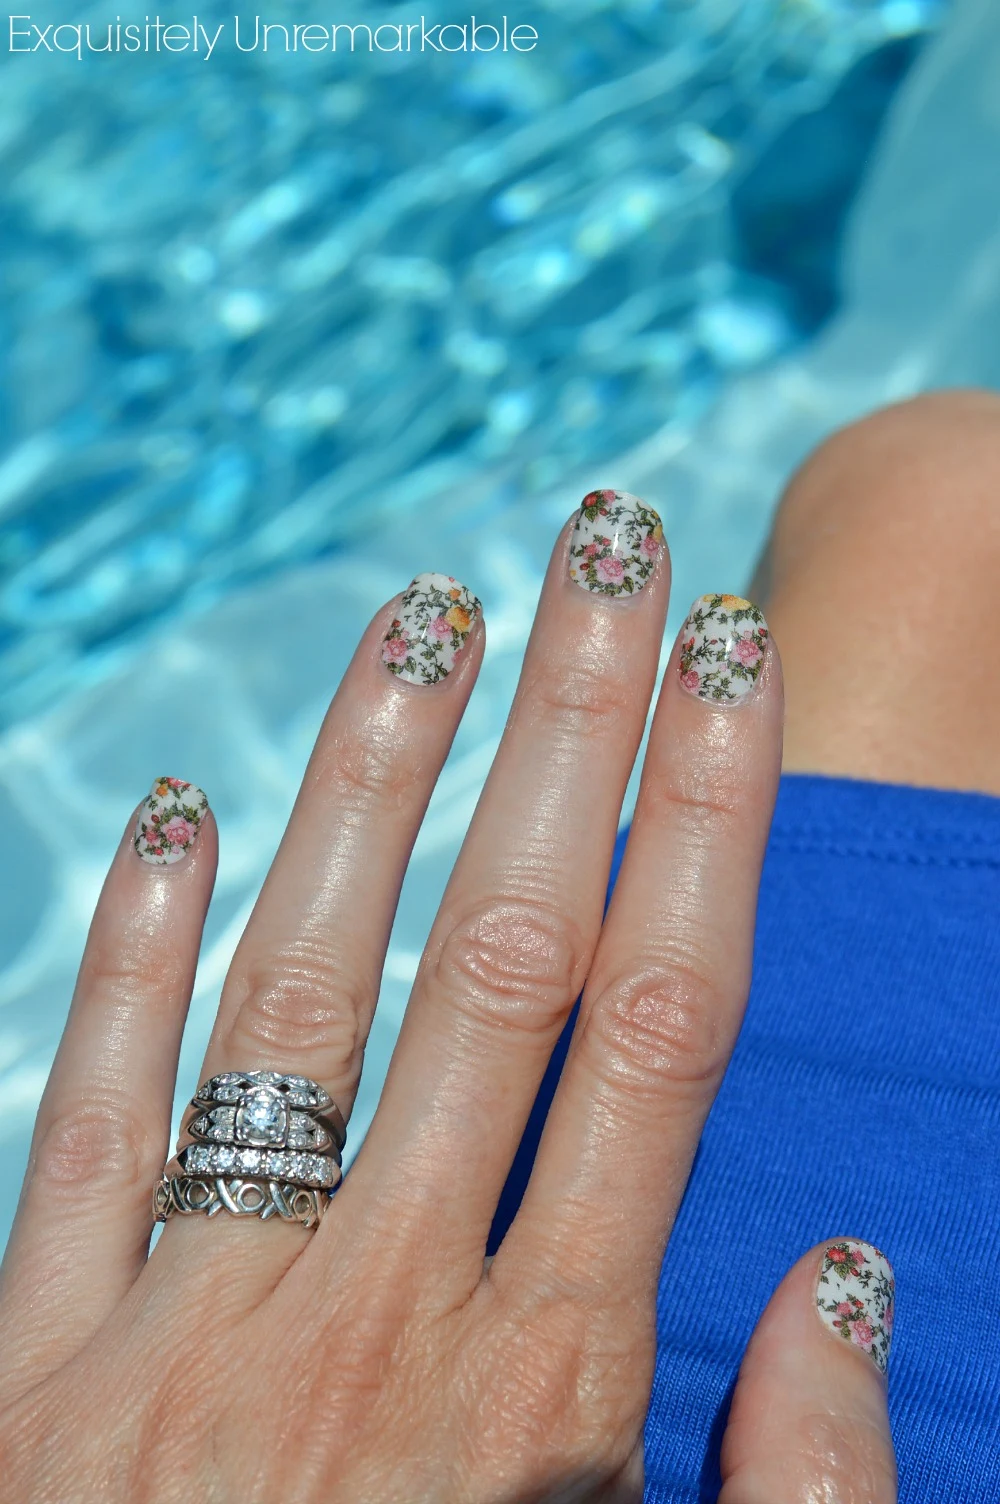 Hand in front of water wearing floral nail wraps